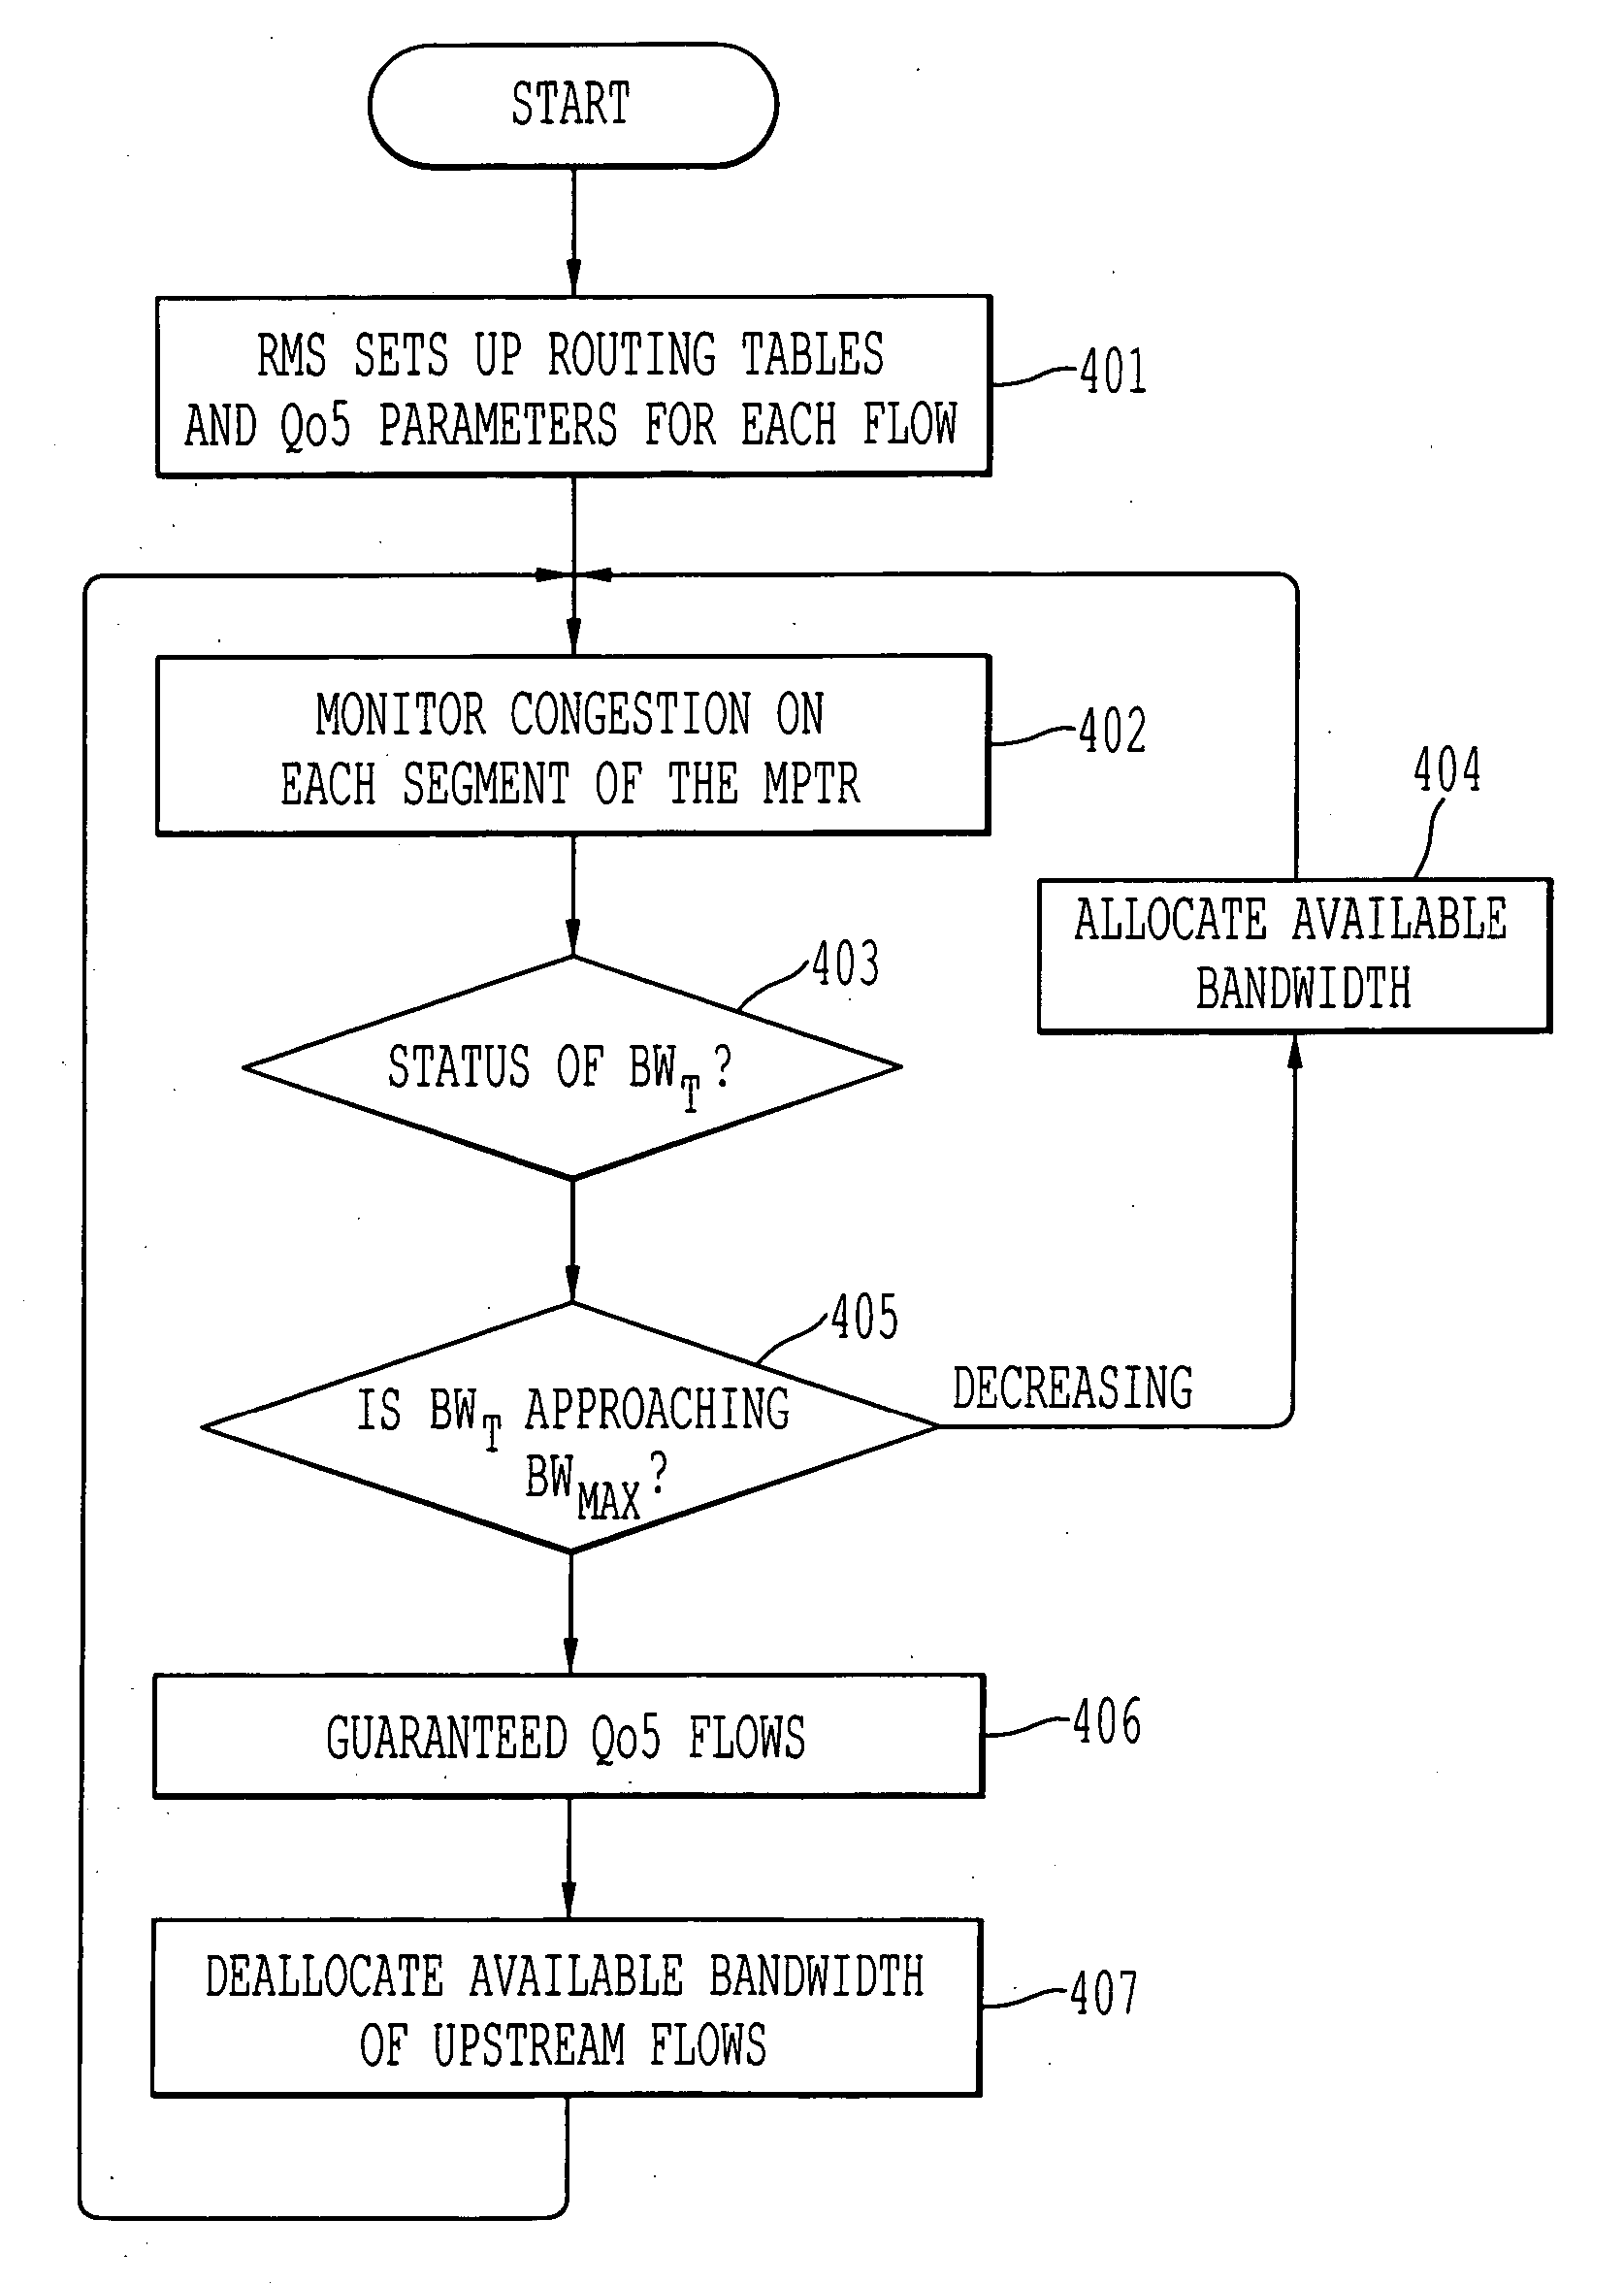 Per-flow rate control for an asynchronous metro packet transport ring